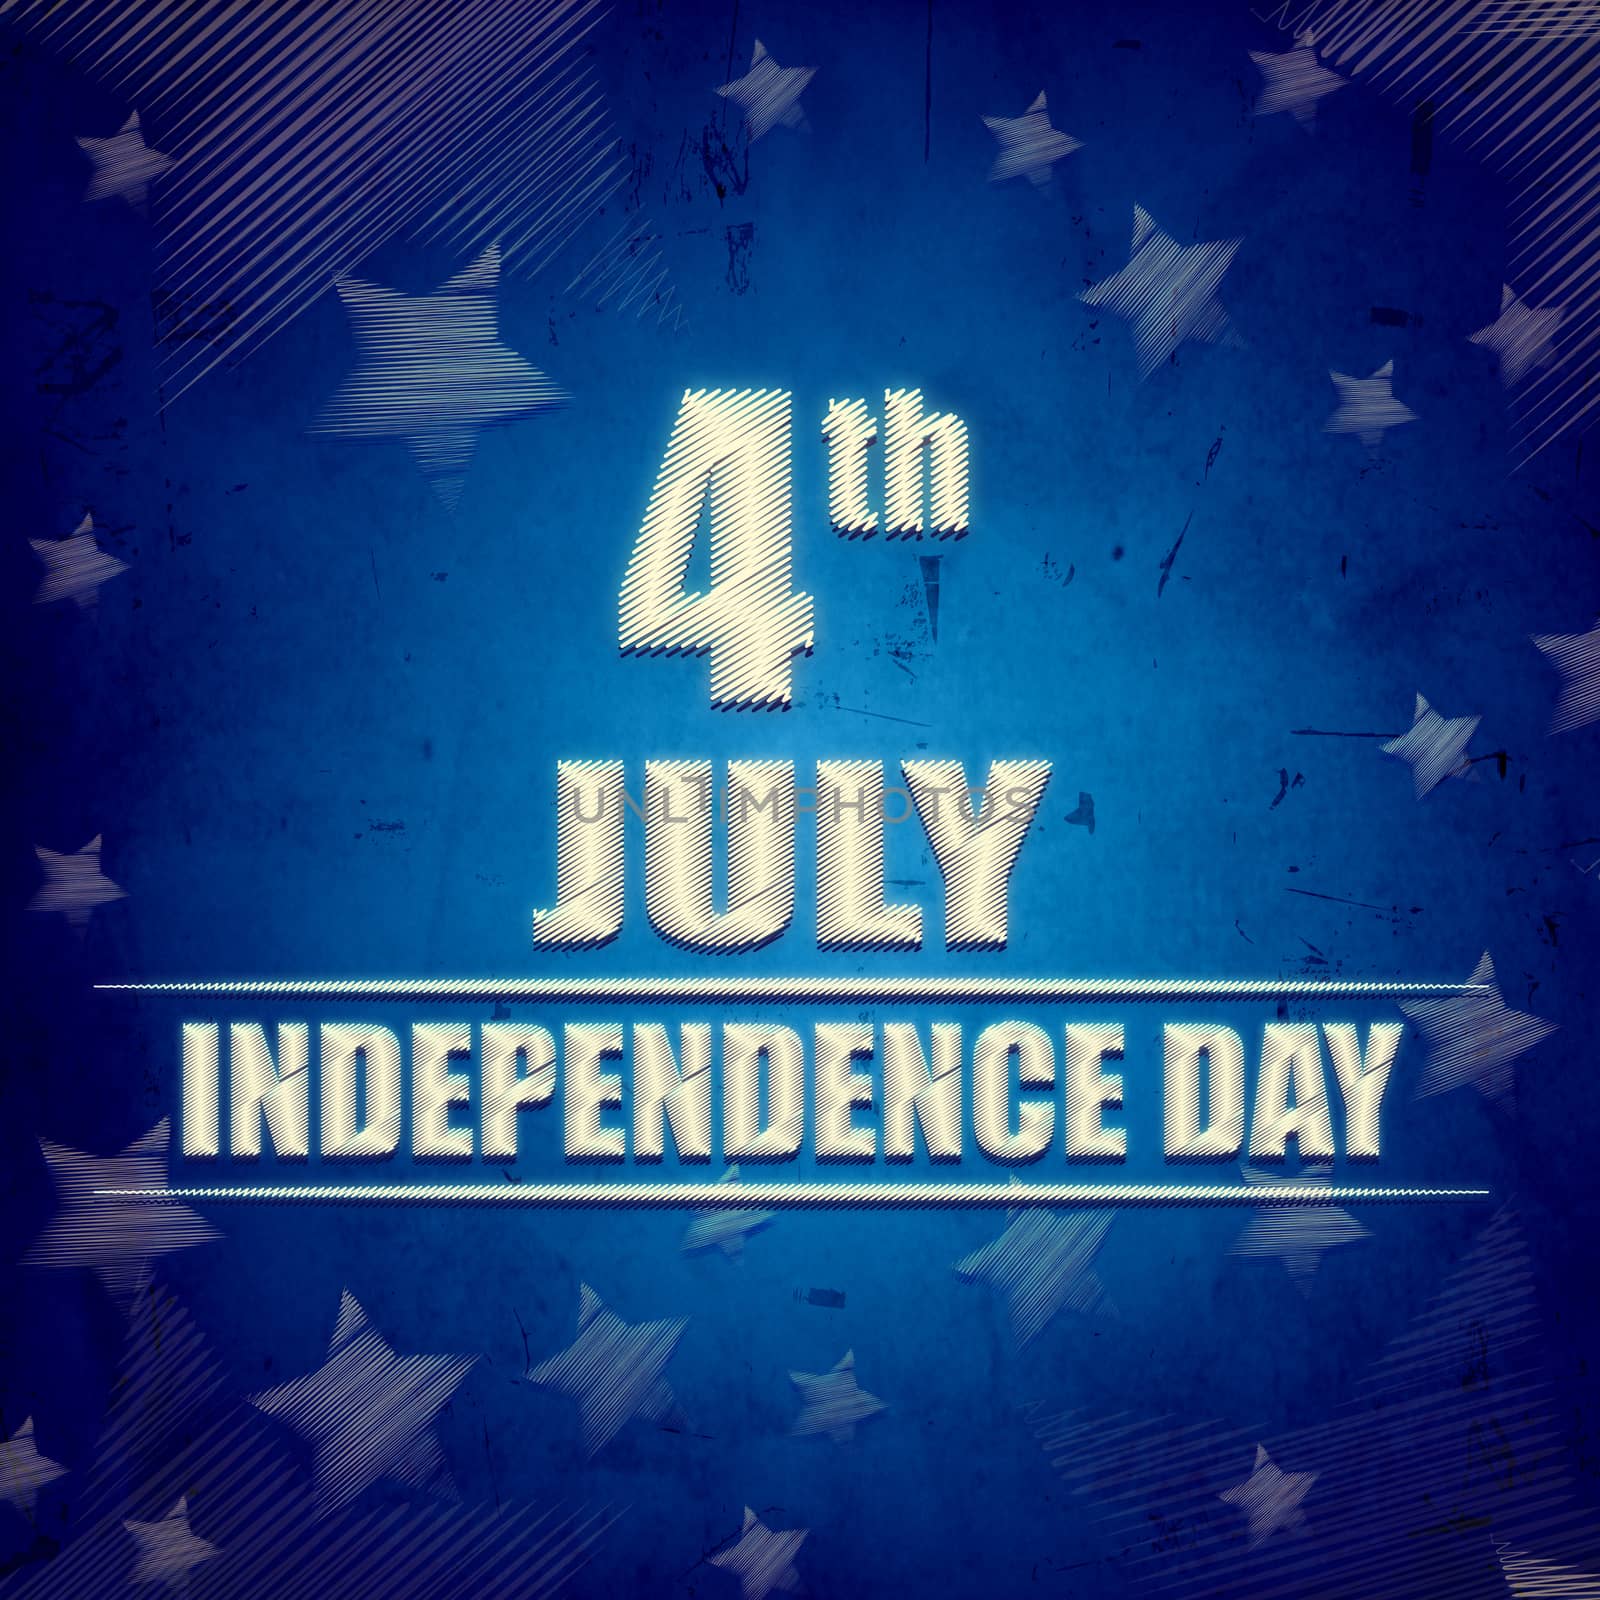 4th of July - American Independence Day - blue retro banner by marinini